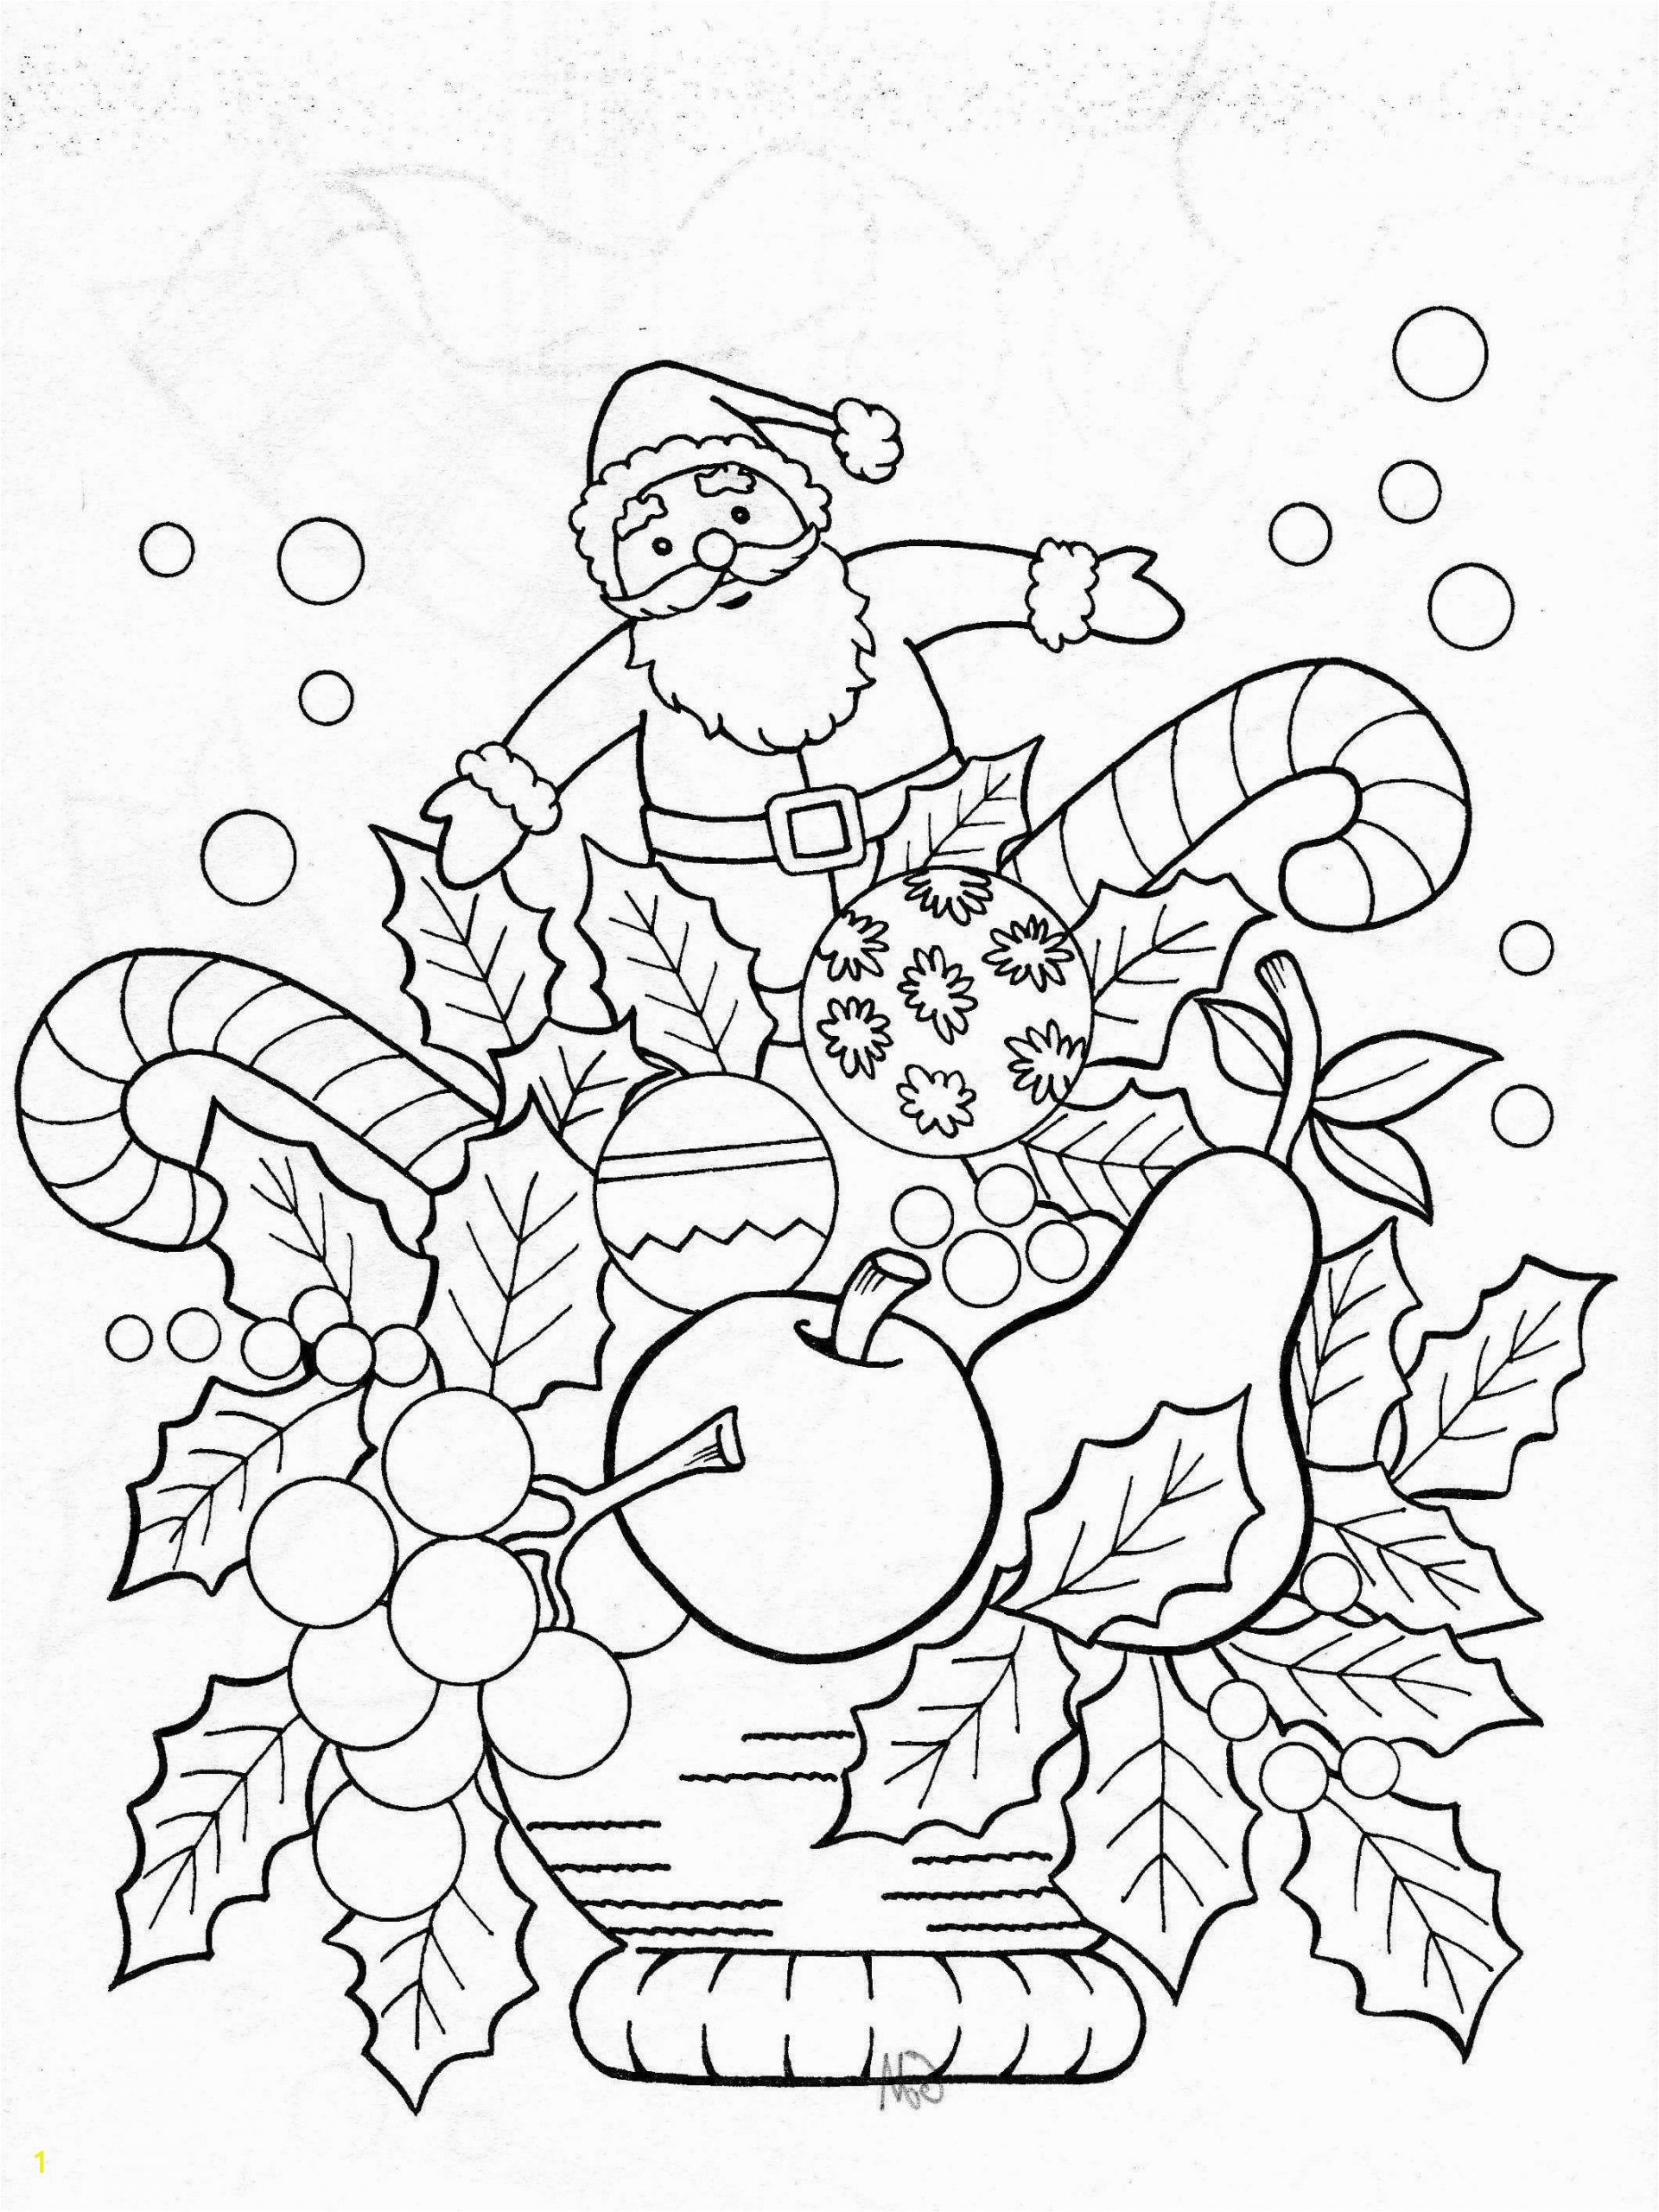 Full Size the Grinch Coloring Pages Christmas Coloring Pages for Printable New Cool Coloring